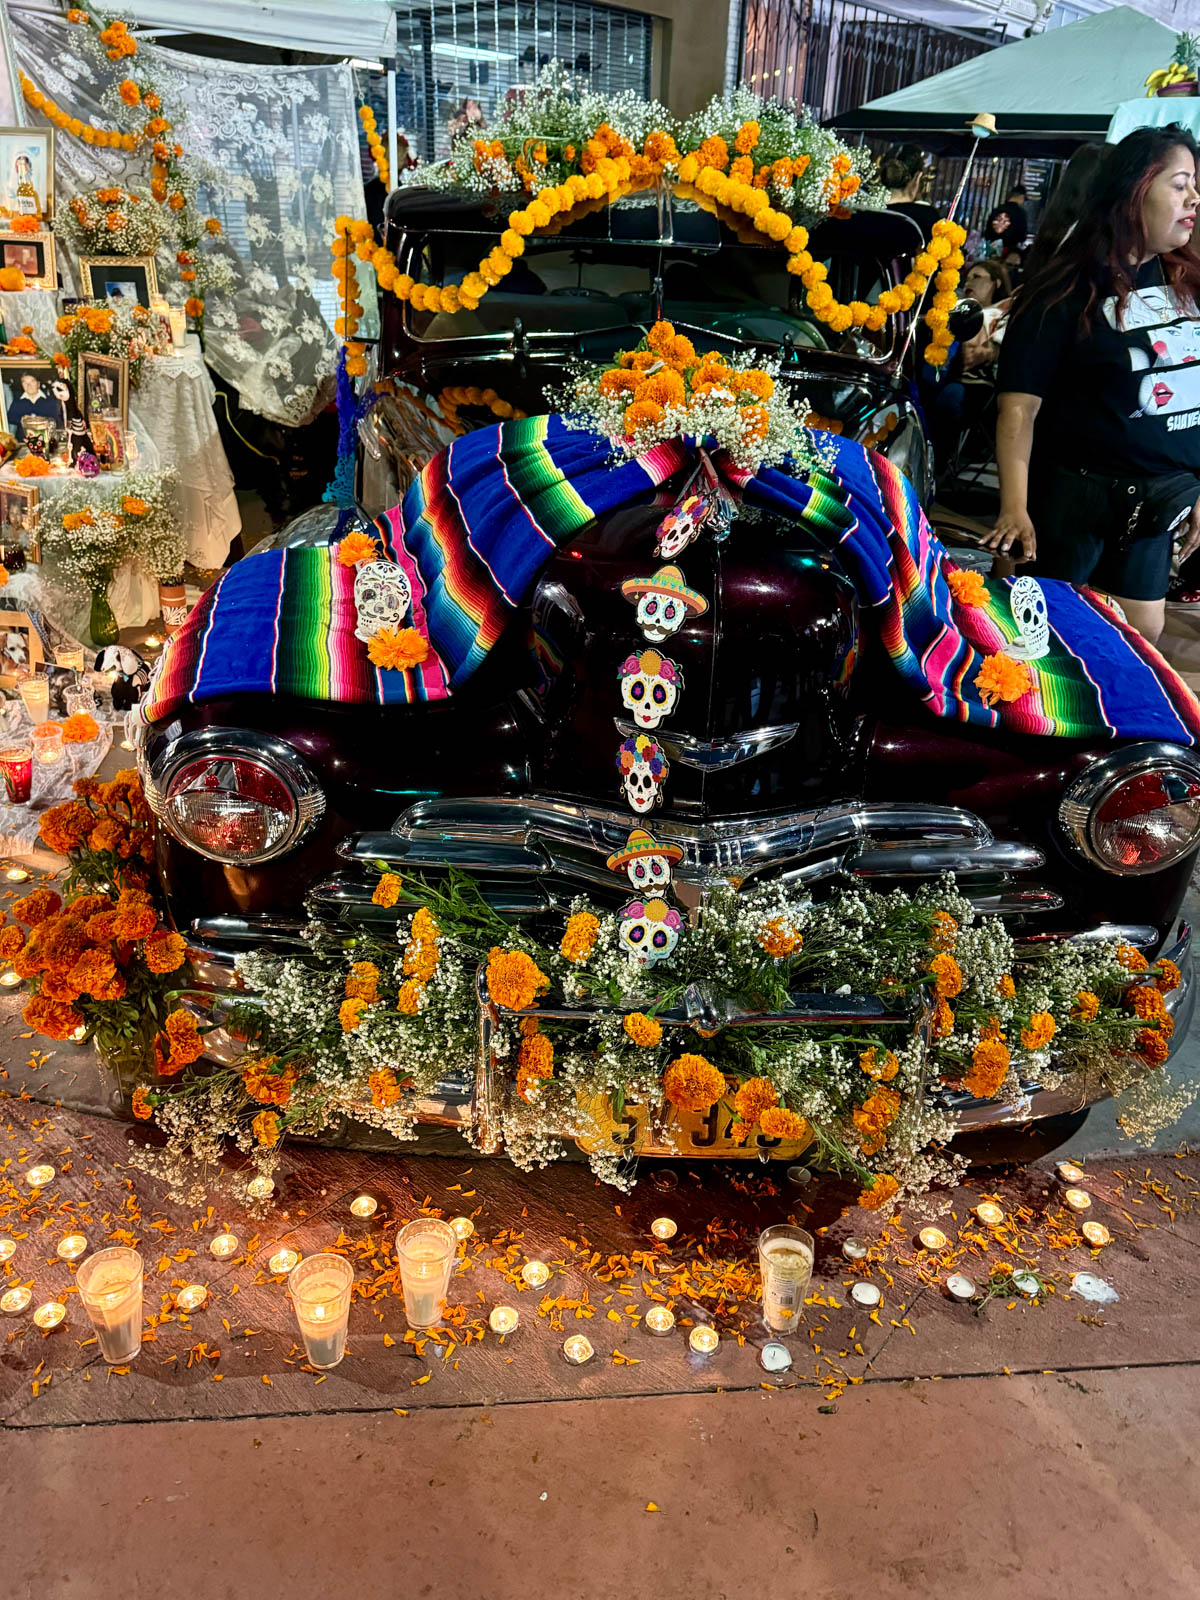 Car decorated for day of the dead festival.